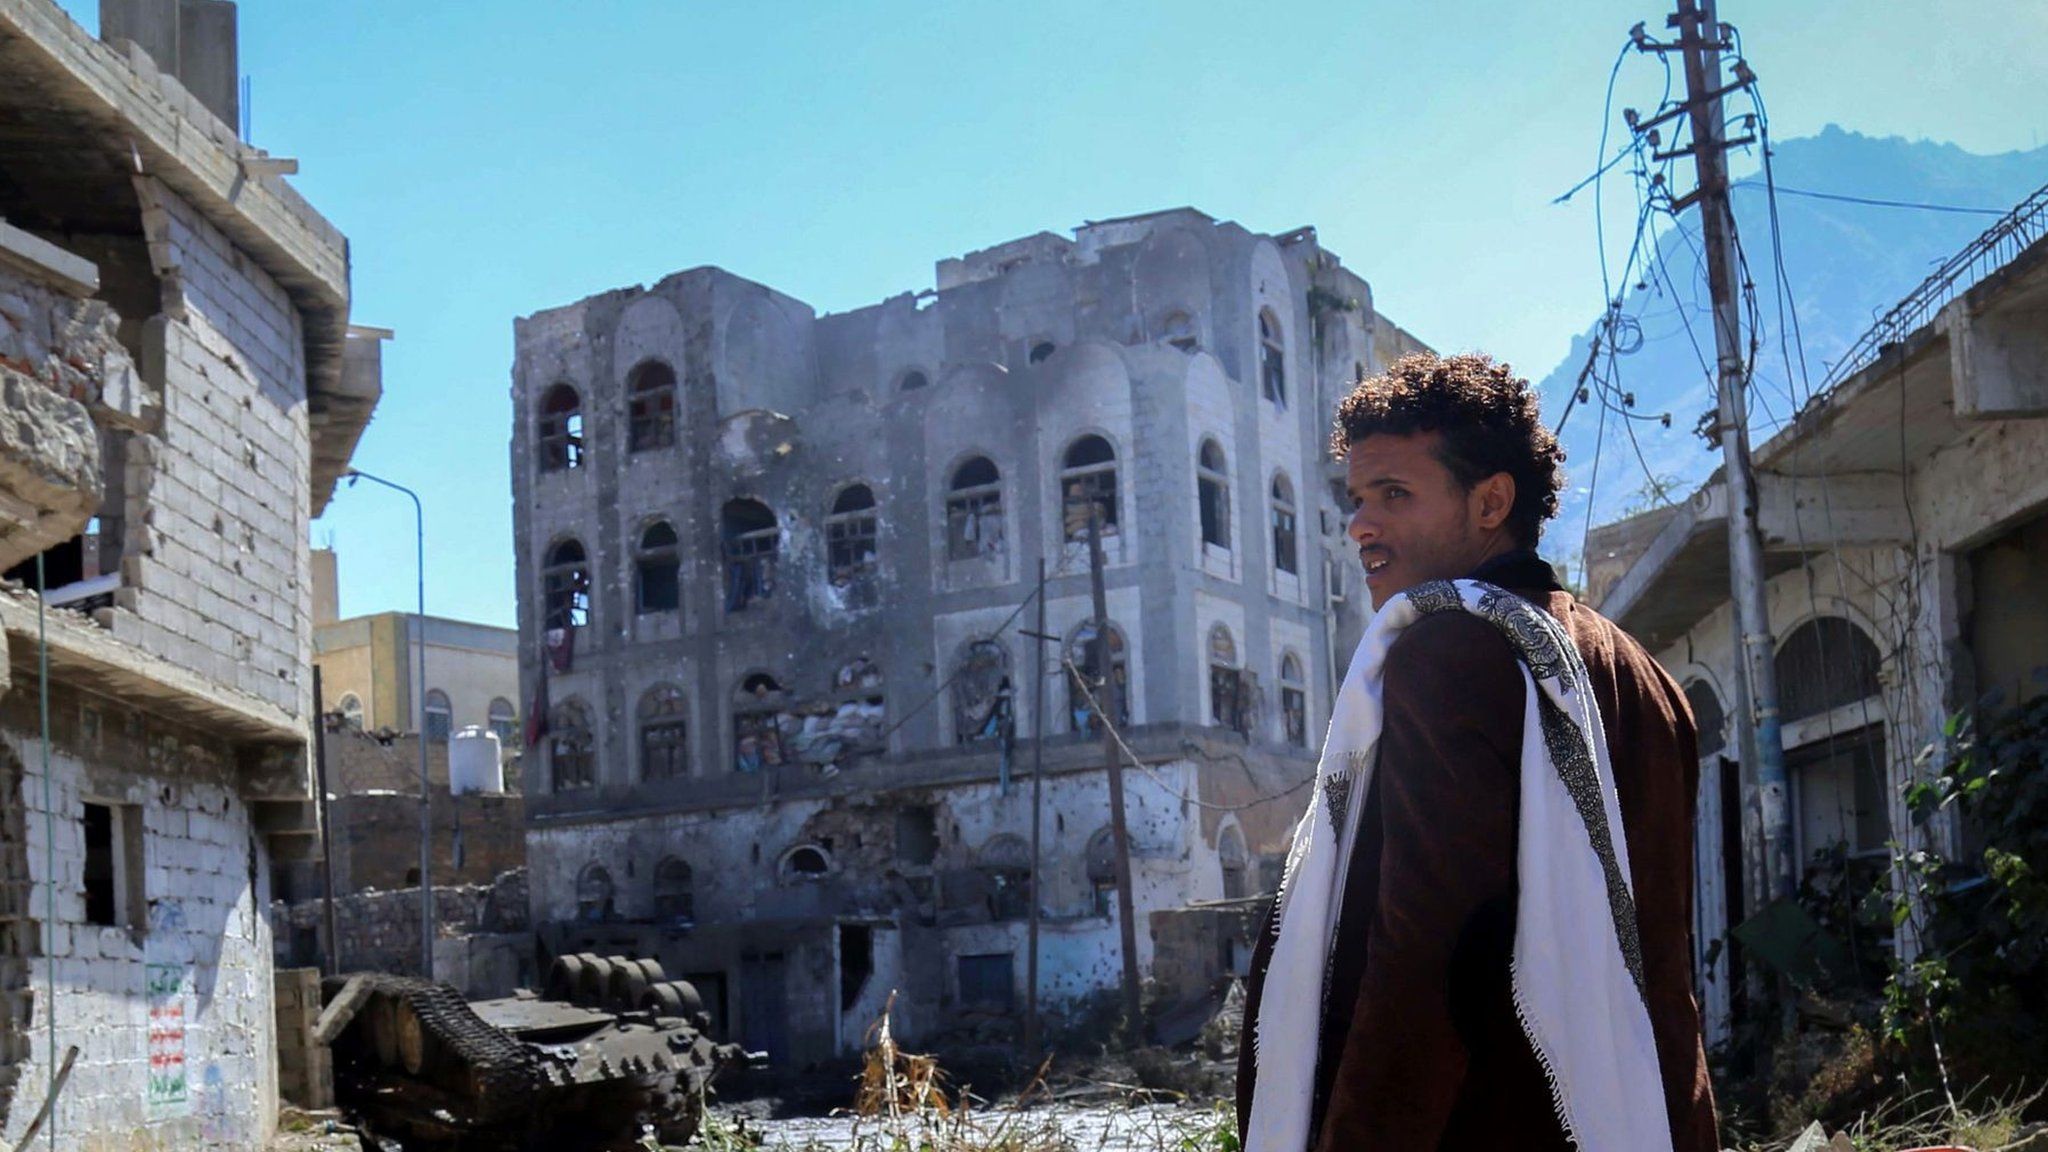 A Yemeni man inspects the damage on a street on November 22, 2016 in the country's third-city Taiz.